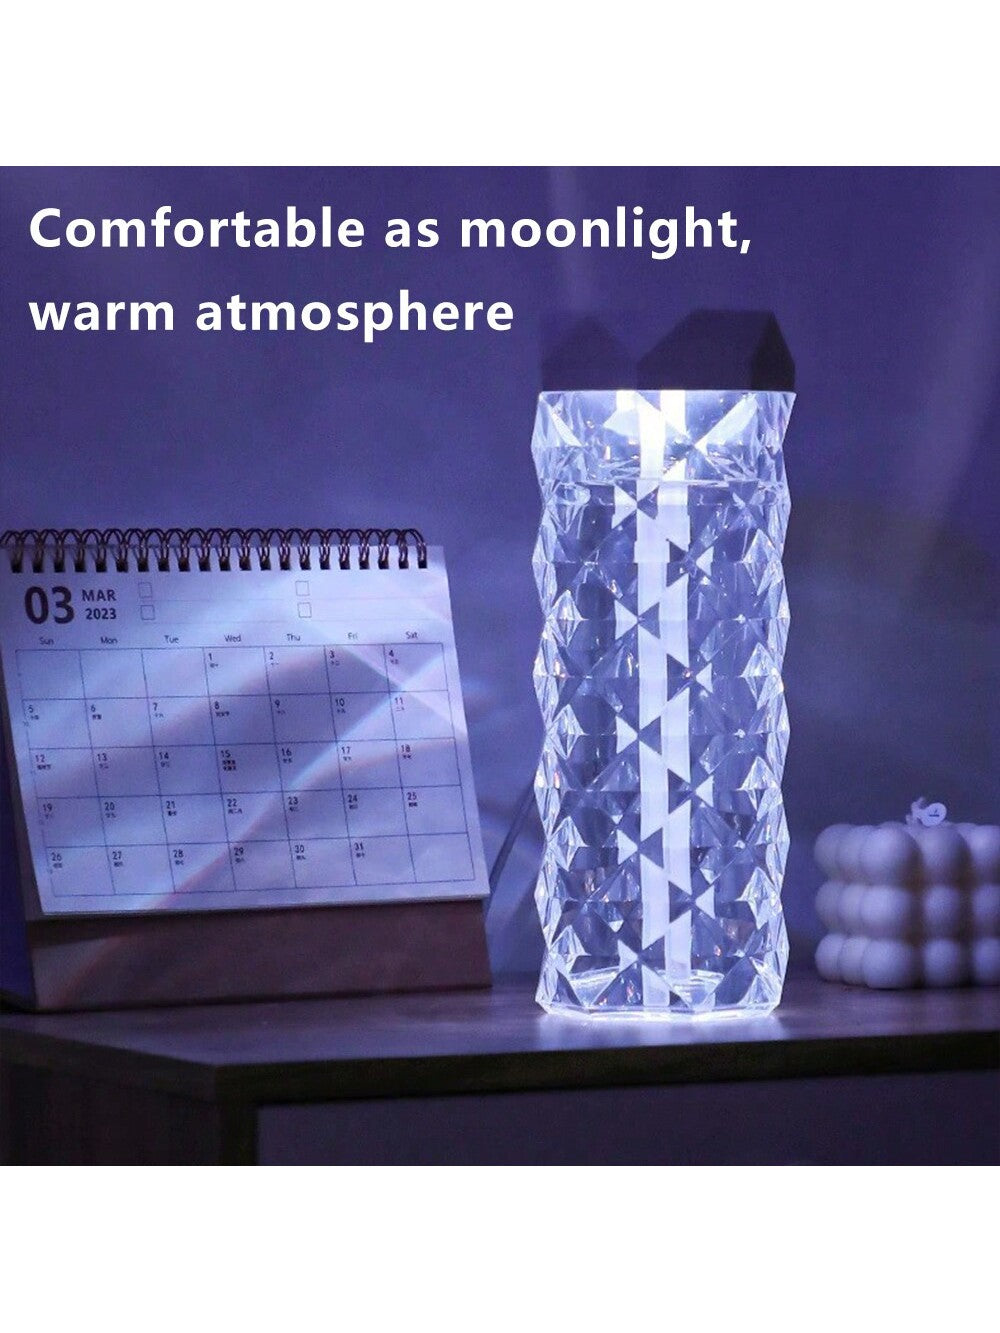 Crystal humidifier home small quiet colorful atmosphere bedroom desktop car USB humidifier high appearance level atmosphere light, bedroom bedside night light air humidifier home quiet bedroom fog amount student dormitory-White-7